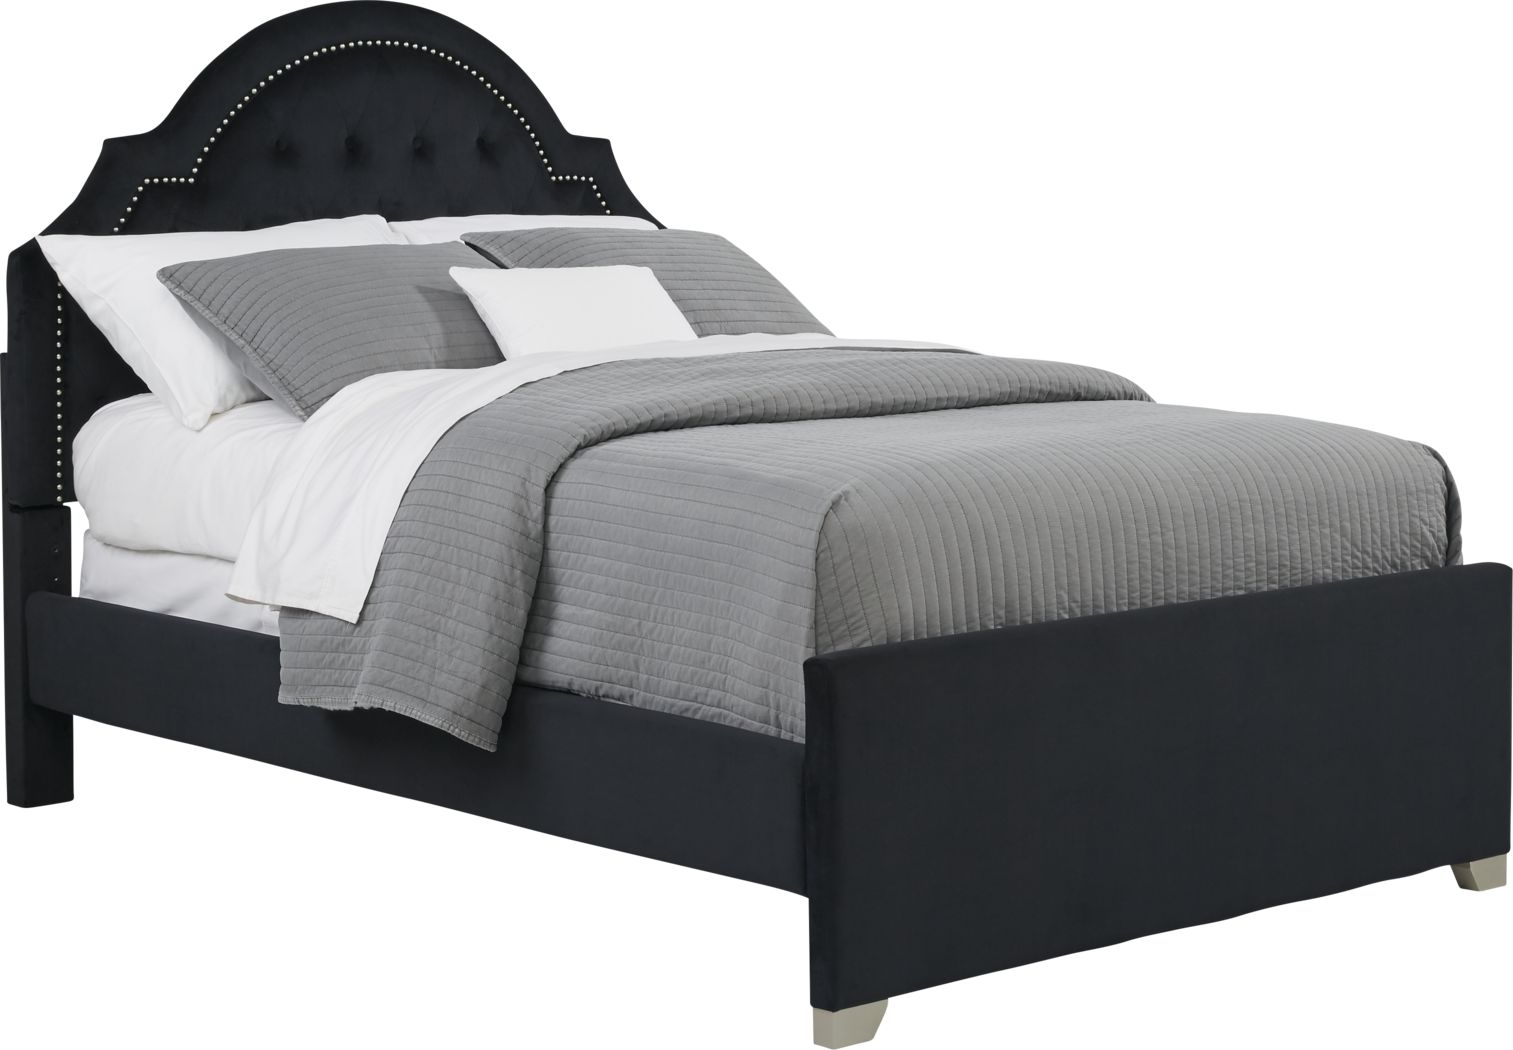 Black Twin Size Beds Single, Black Twin Bed Frame